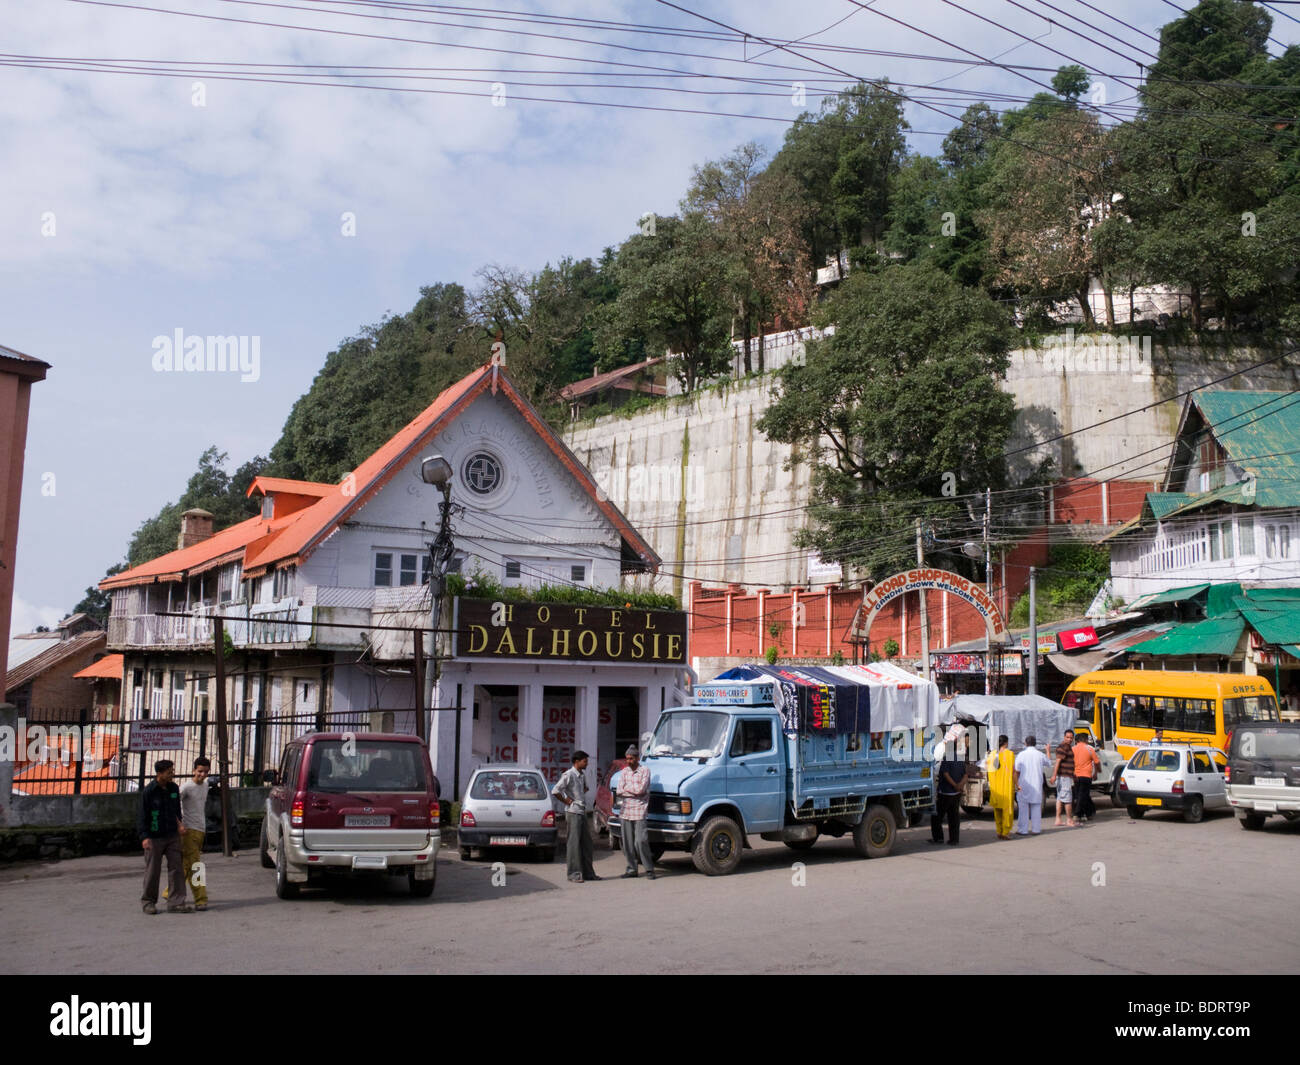 Front exterior of the Hotel Dalhousie in a typical road scene in central Dalhousie. Himachal Pradesh. India. Stock Photo